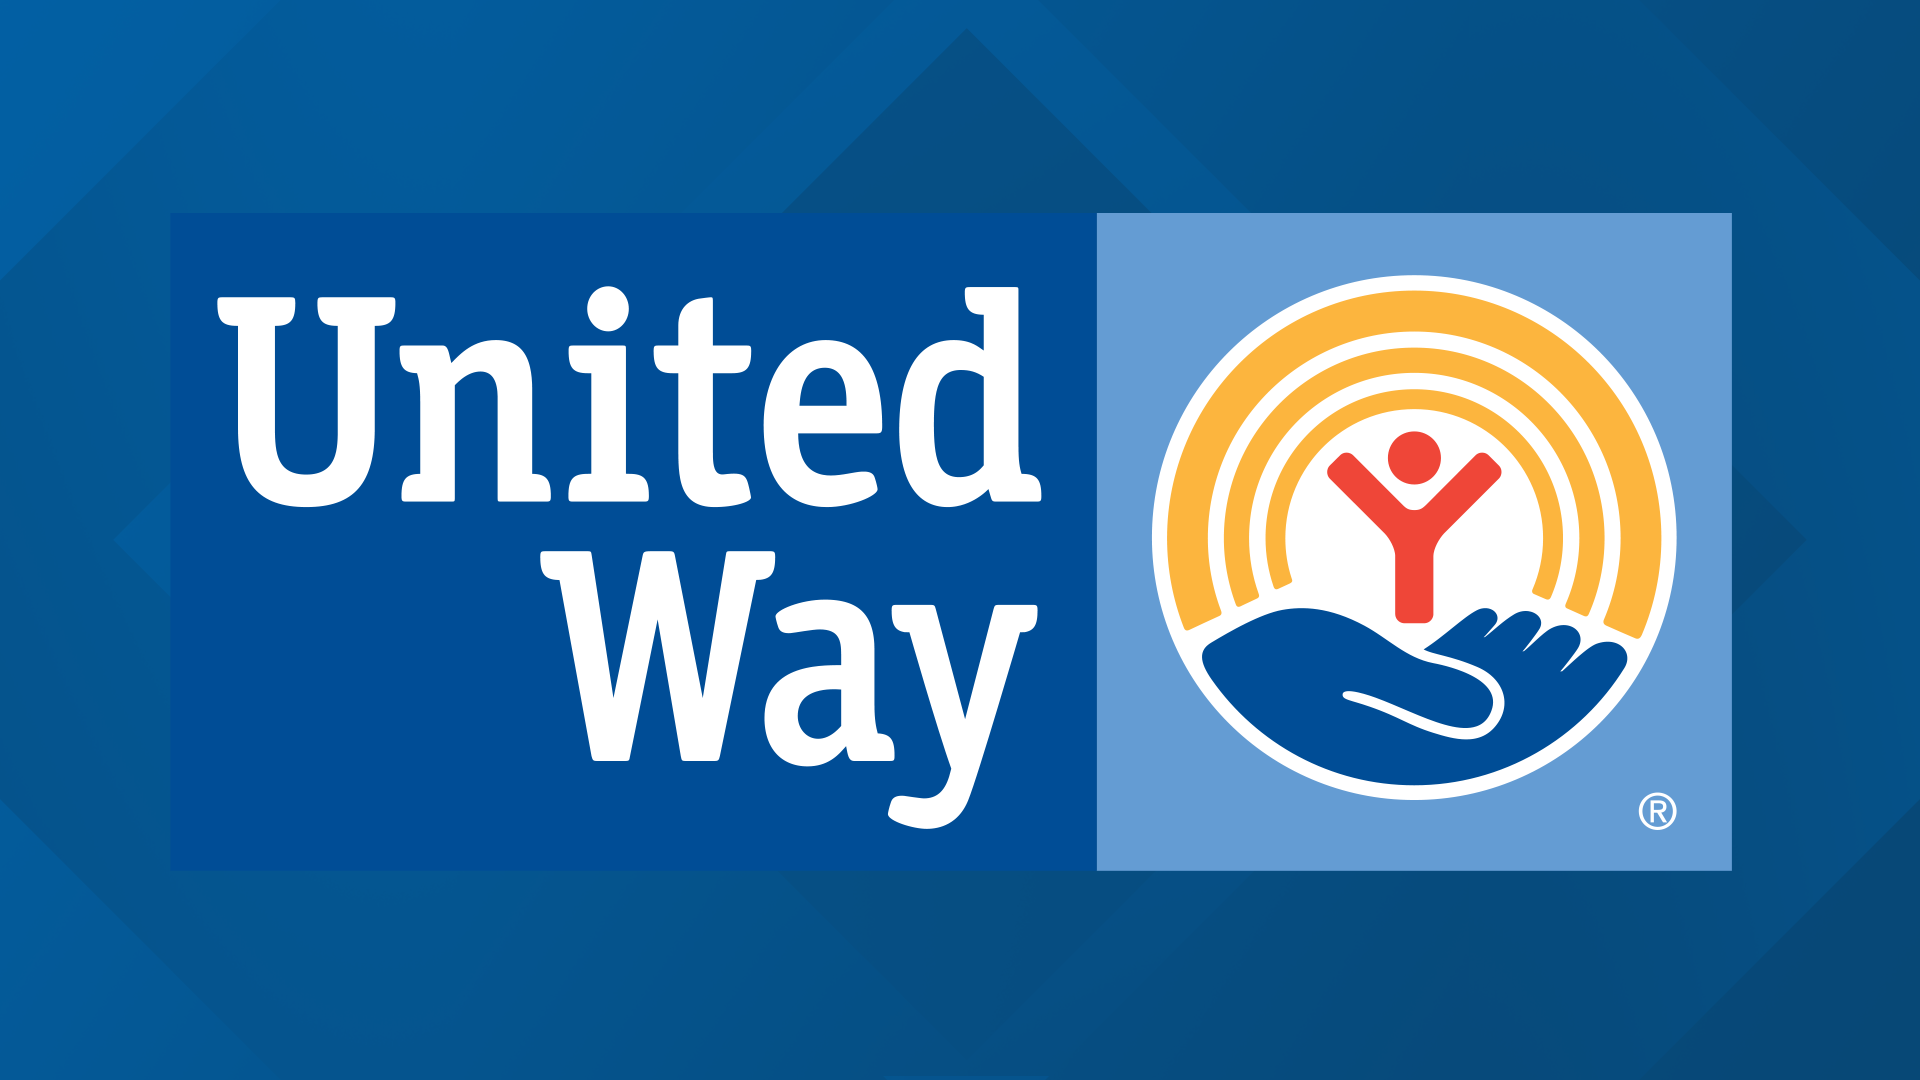 The ALICE report, released by the United Way of Pa., is a study on the financial hardships on individual households across the state due to the COVID-19 pandemic.